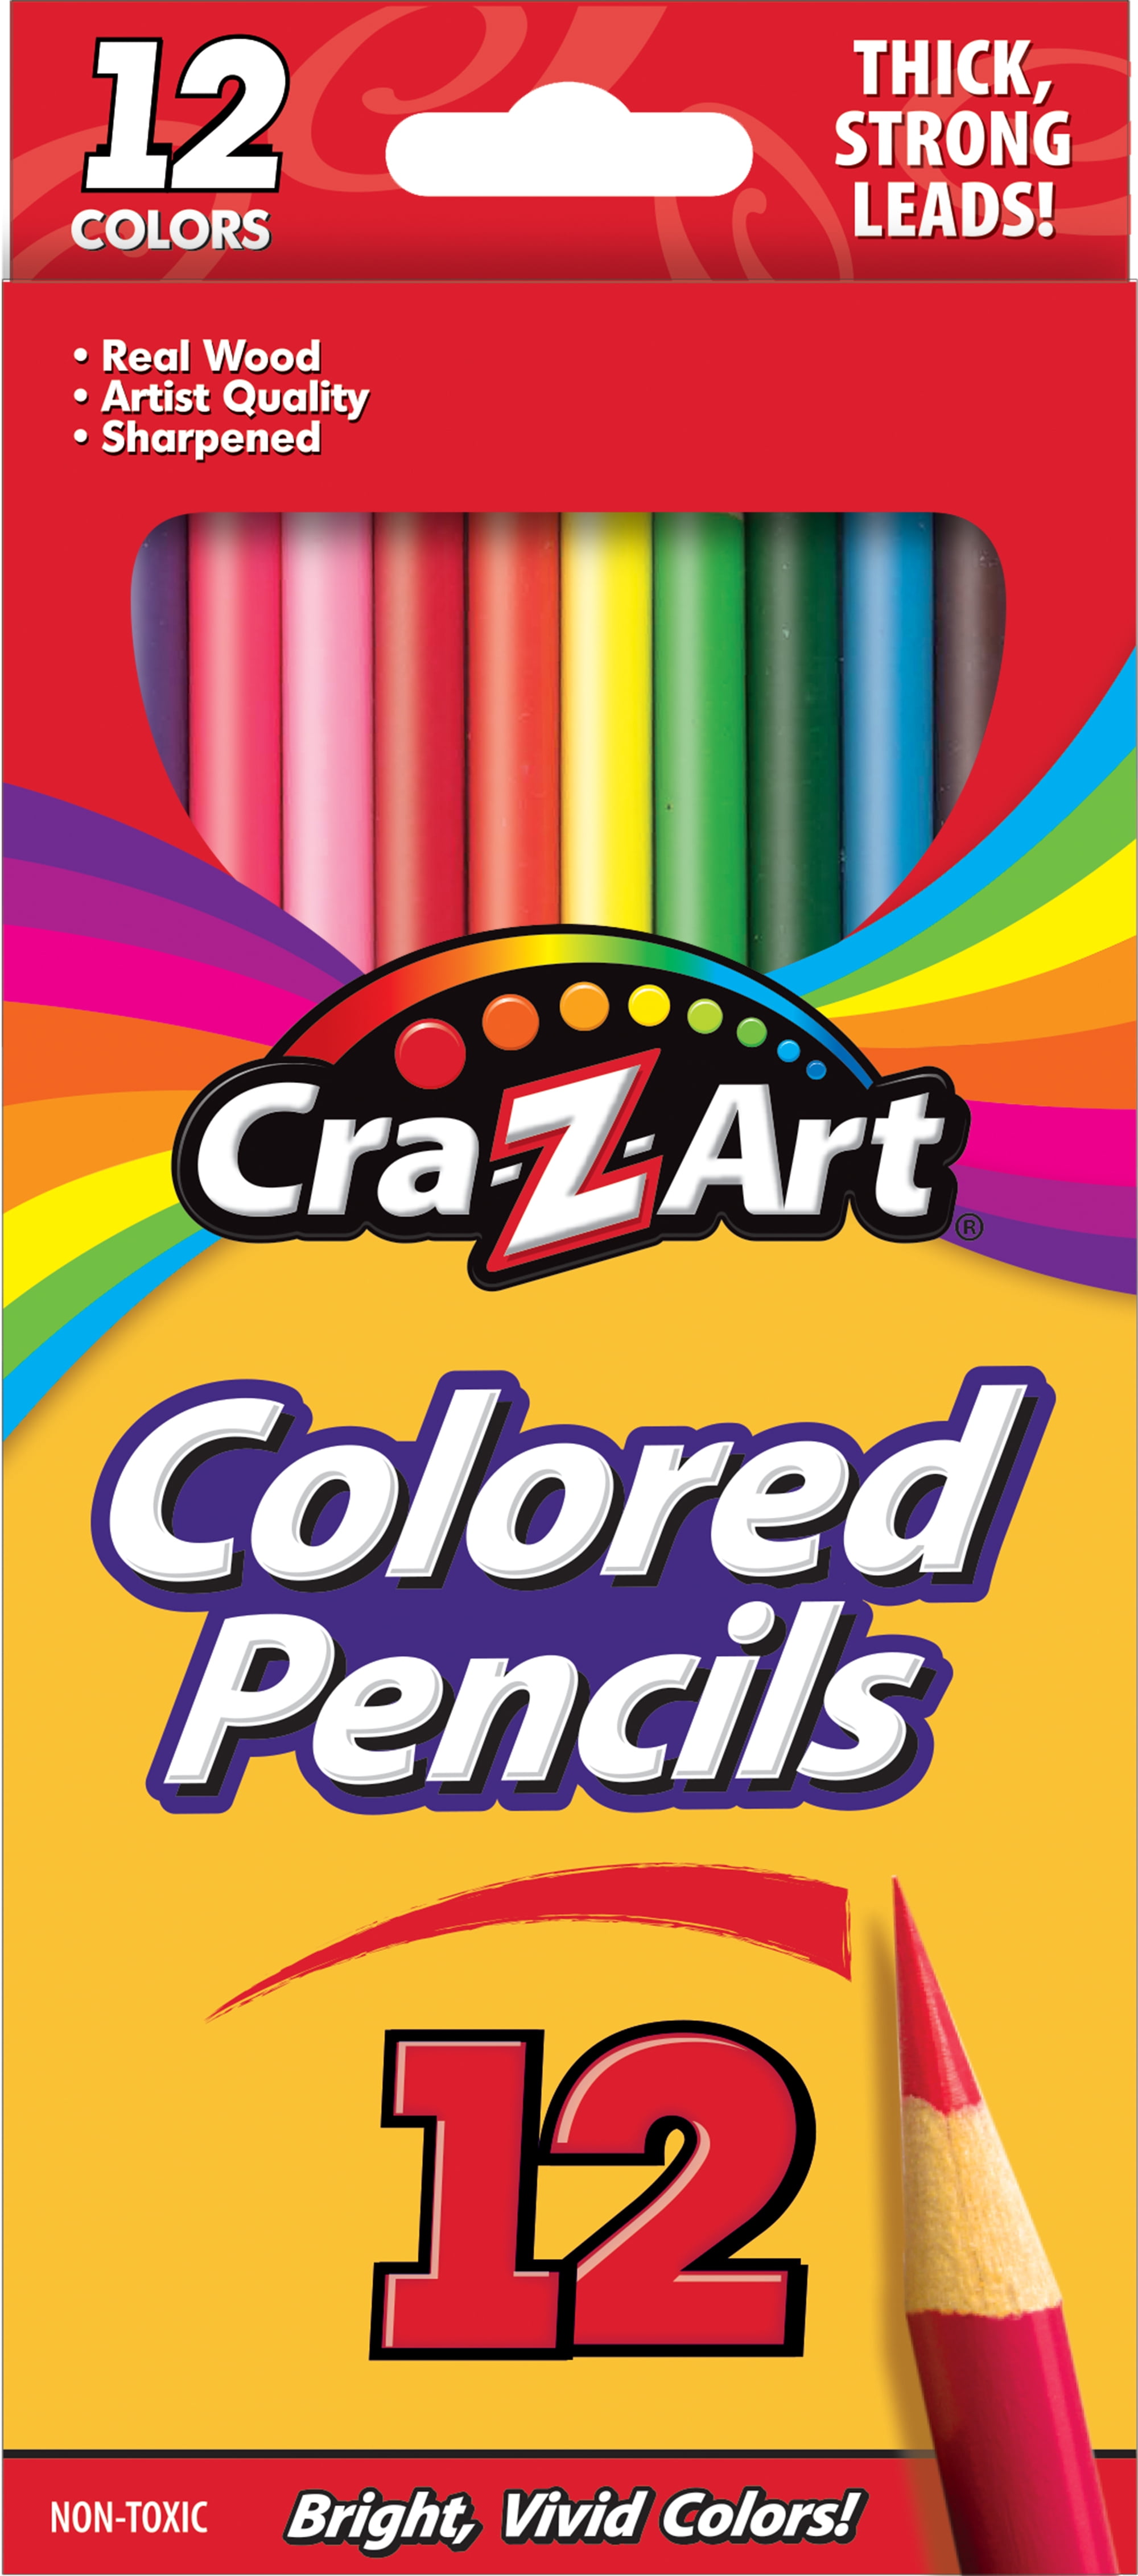 Cra-Z-Art Colored Pencils, 12 Count, Beginner Child to Adult, Ages 4 and up